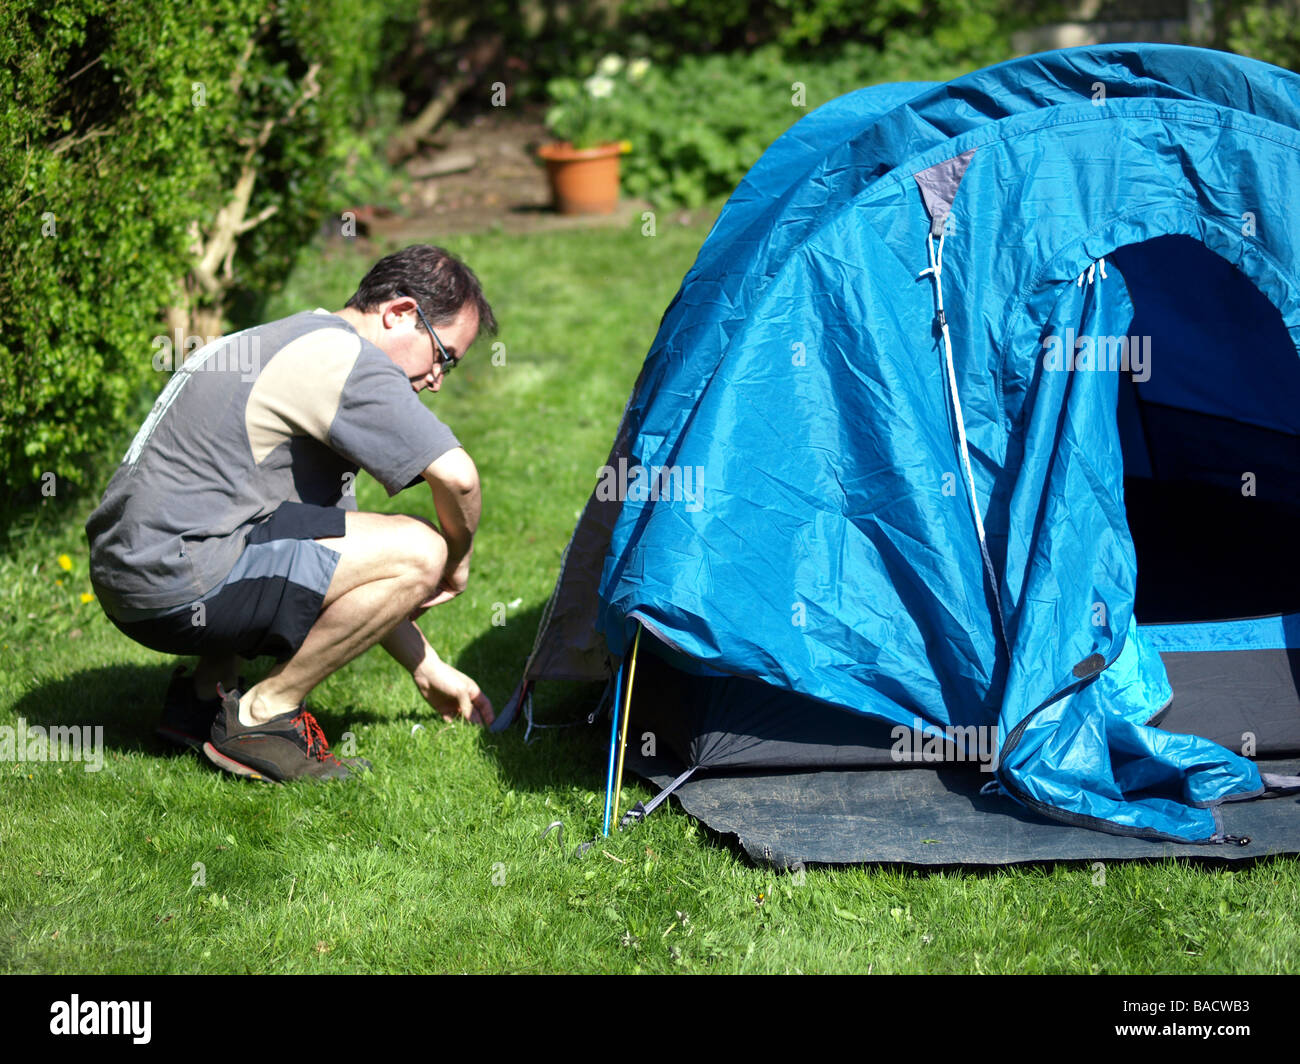 A camper setting up his tent Stock Photo - Alamy